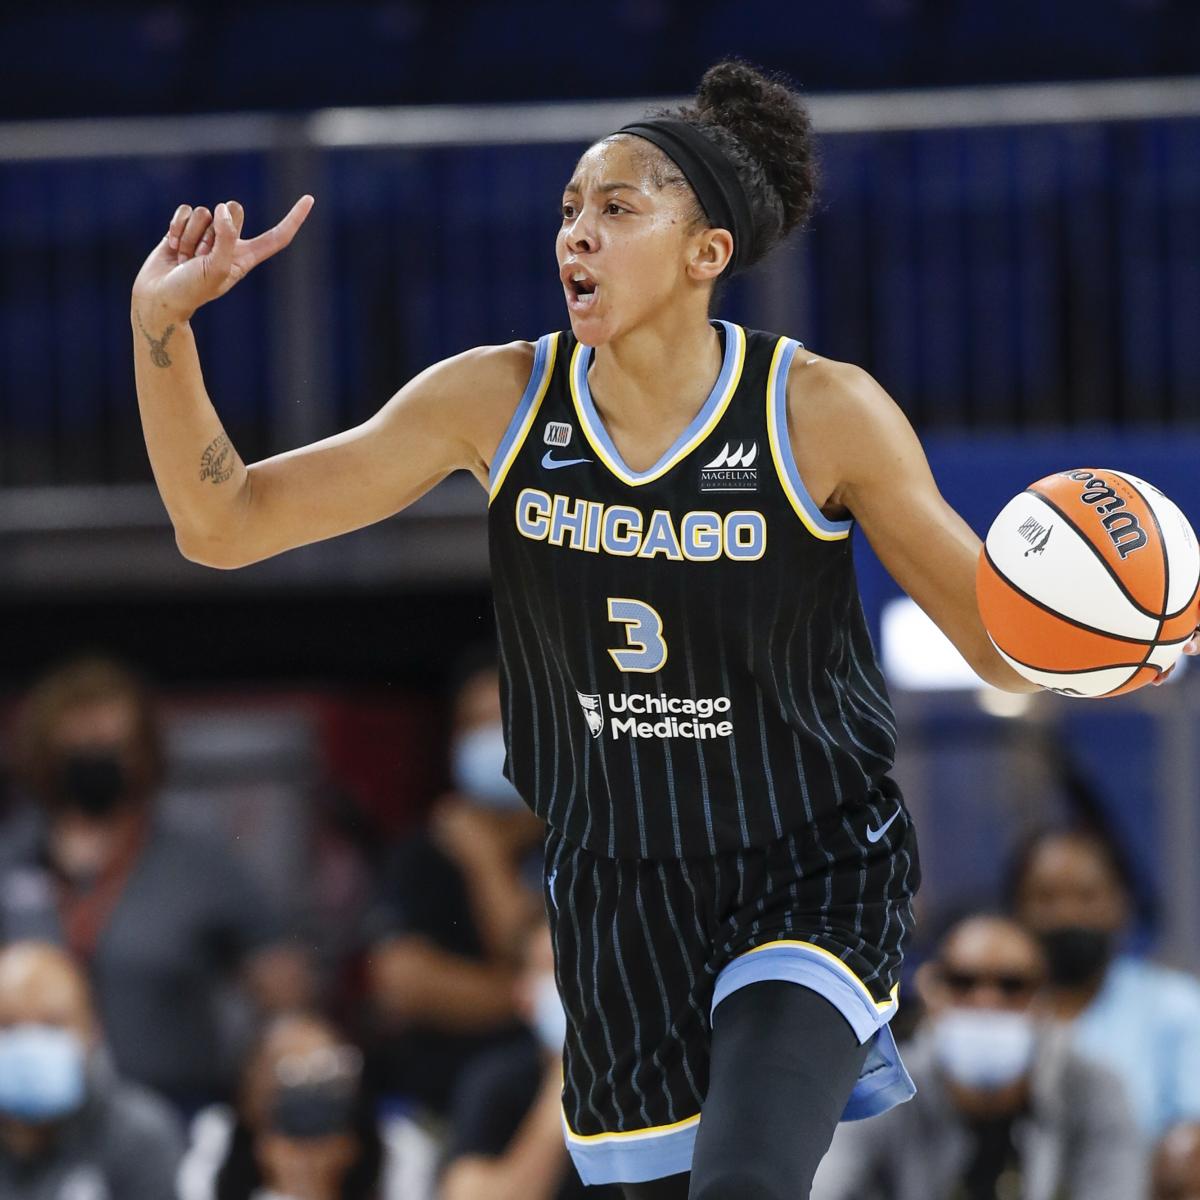 Candace Parker’s Trip to 2021 WNBA Finals Used to be Rarely Assured